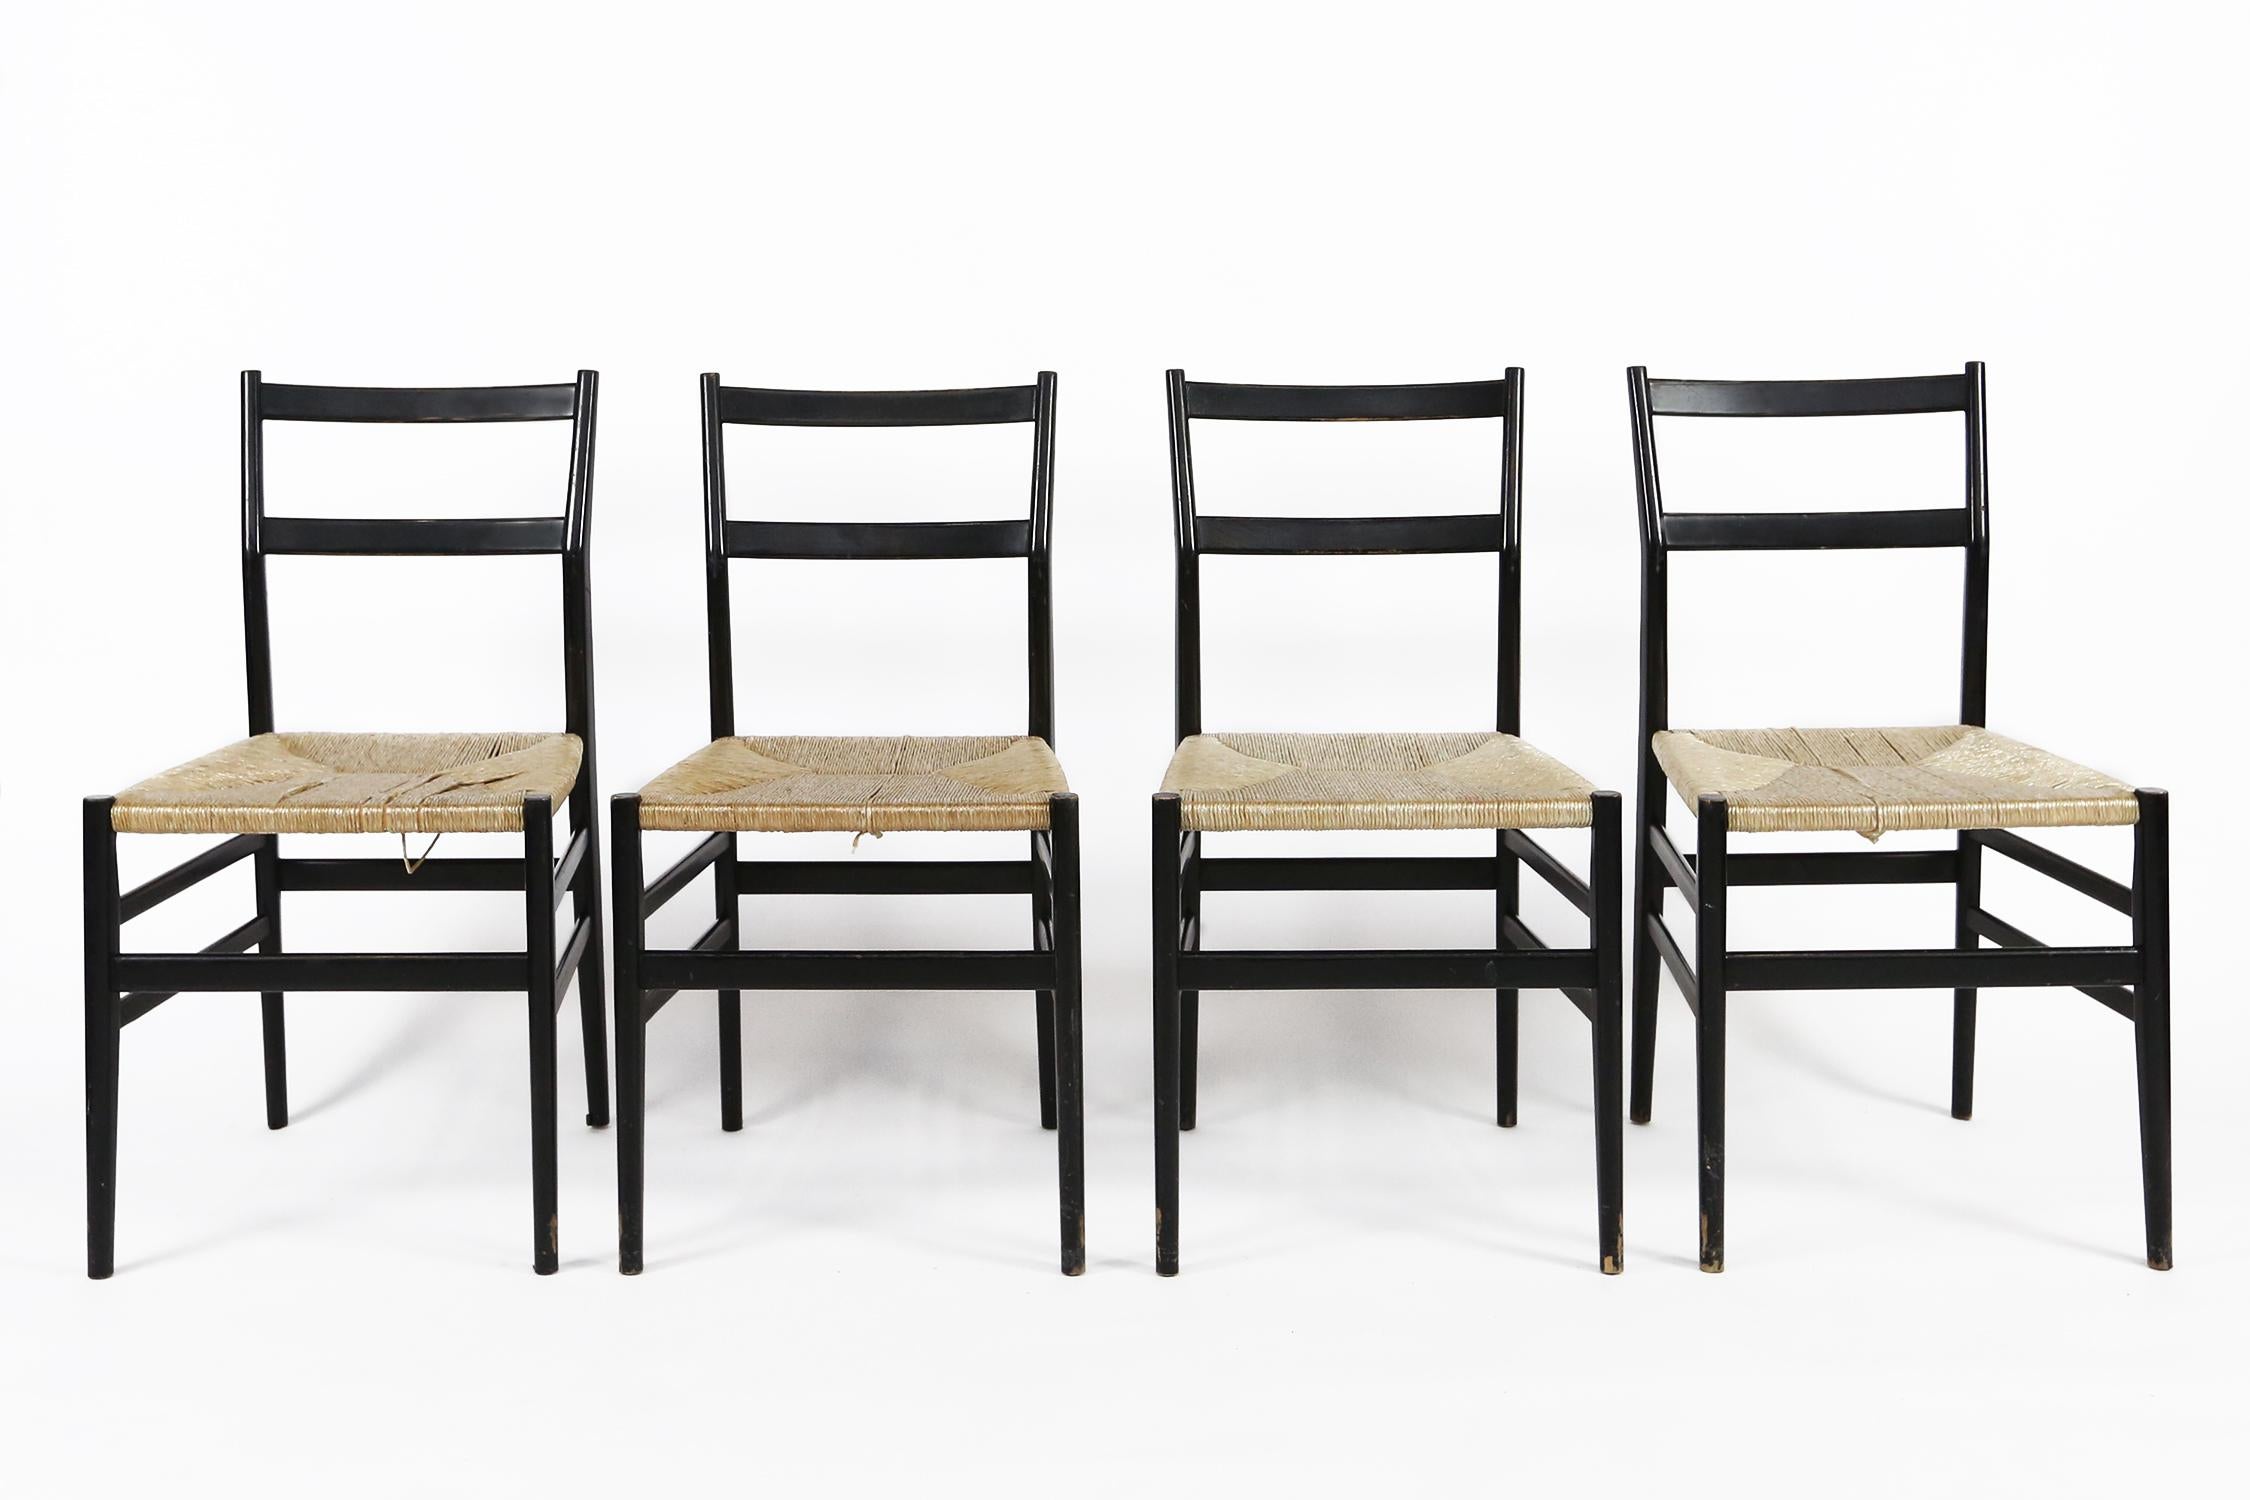 12 Leggera Chairs by Gio Ponti by Cassina, Milano, 1960s For Sale 9